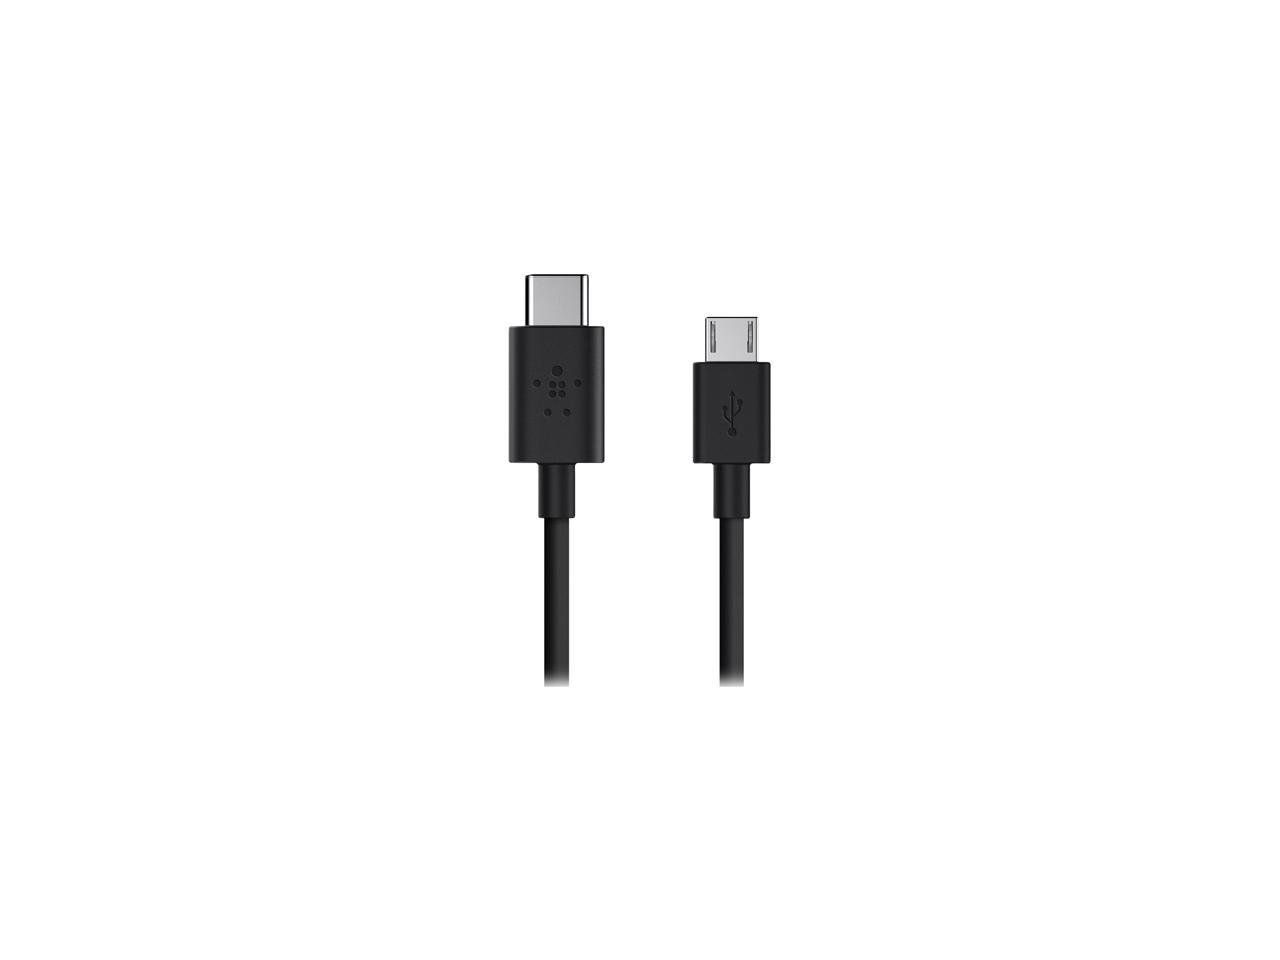 Belkin 2.0 USB-C to Micro USB Charge Cable, Works with Google Chromebook Pixel 2, Apple New MacBook and Other USB Type C Compatible Devices (6-Foot)